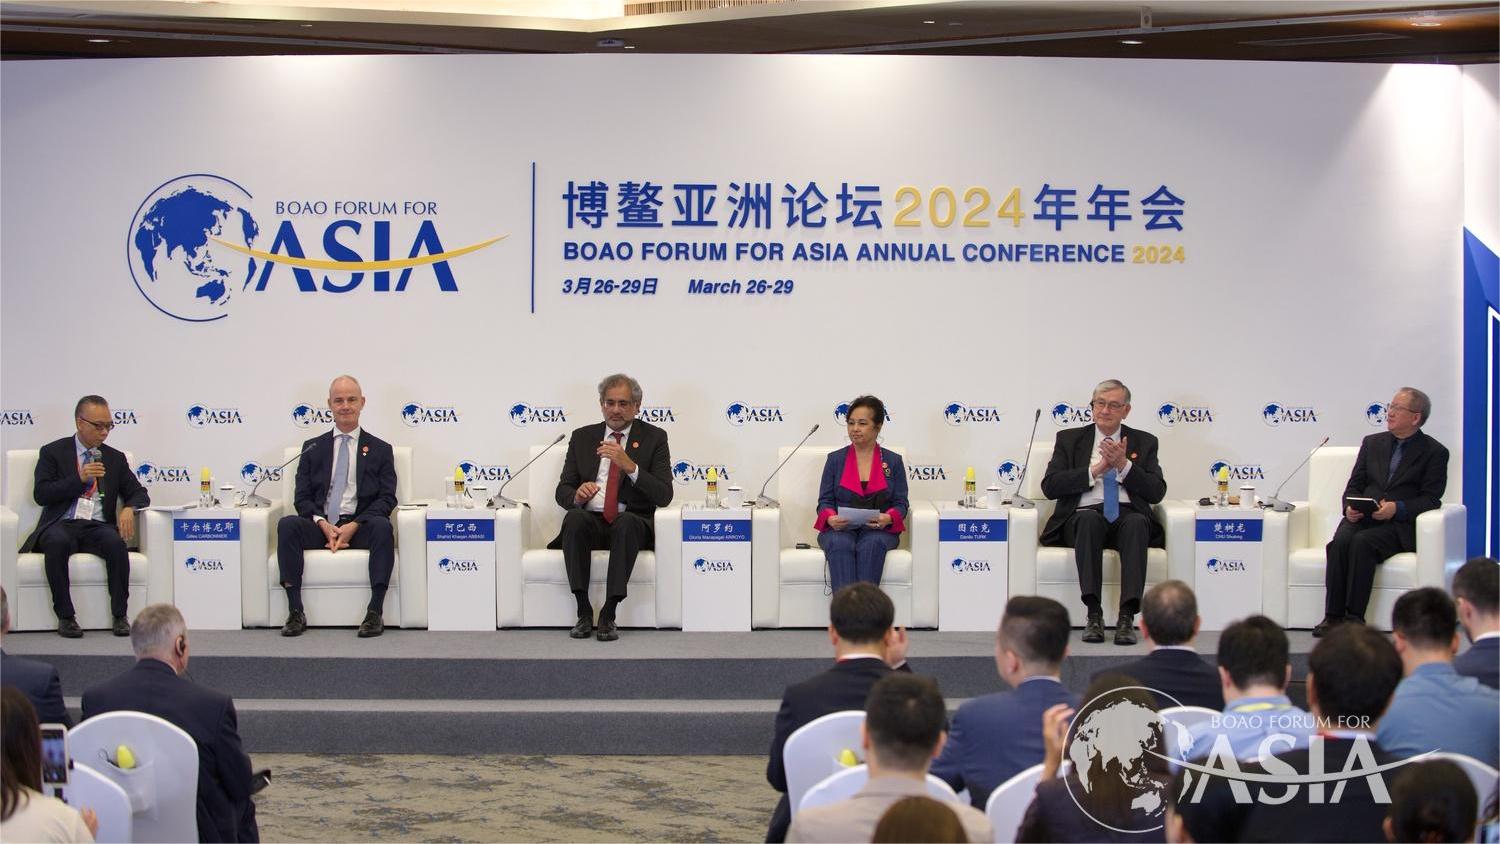 Int'l politicians and experts urge for solidarity, inclusiveness at Boao Forum